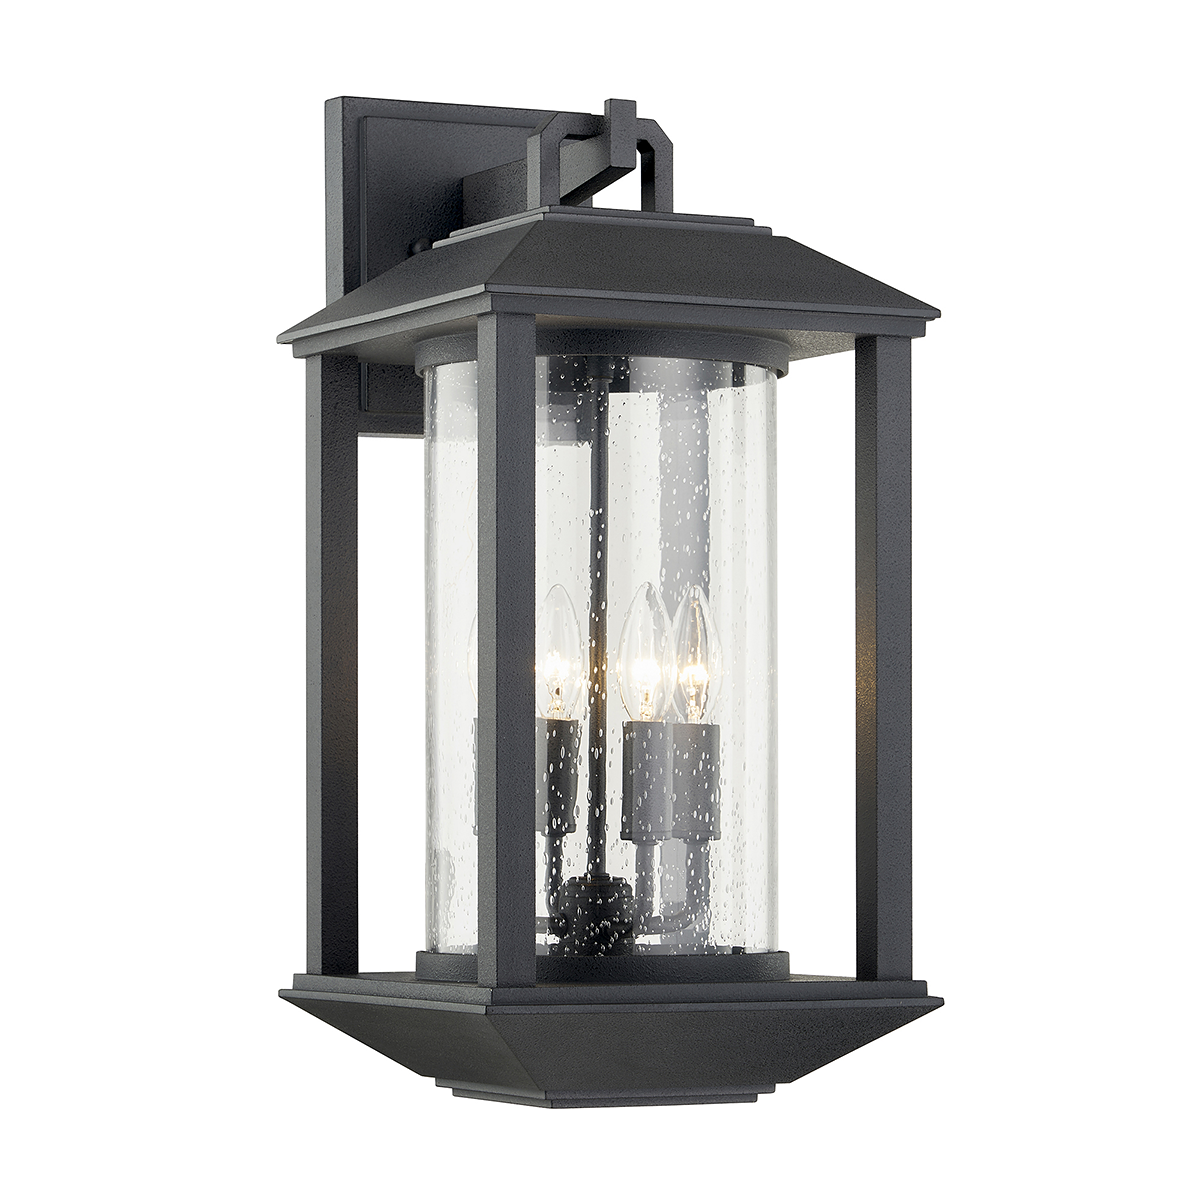 Troy Lighting MCCARTHY 4LT WALL B7283 Outdoor l Wall Troy Lighting WEATHERED GRAPHITE  